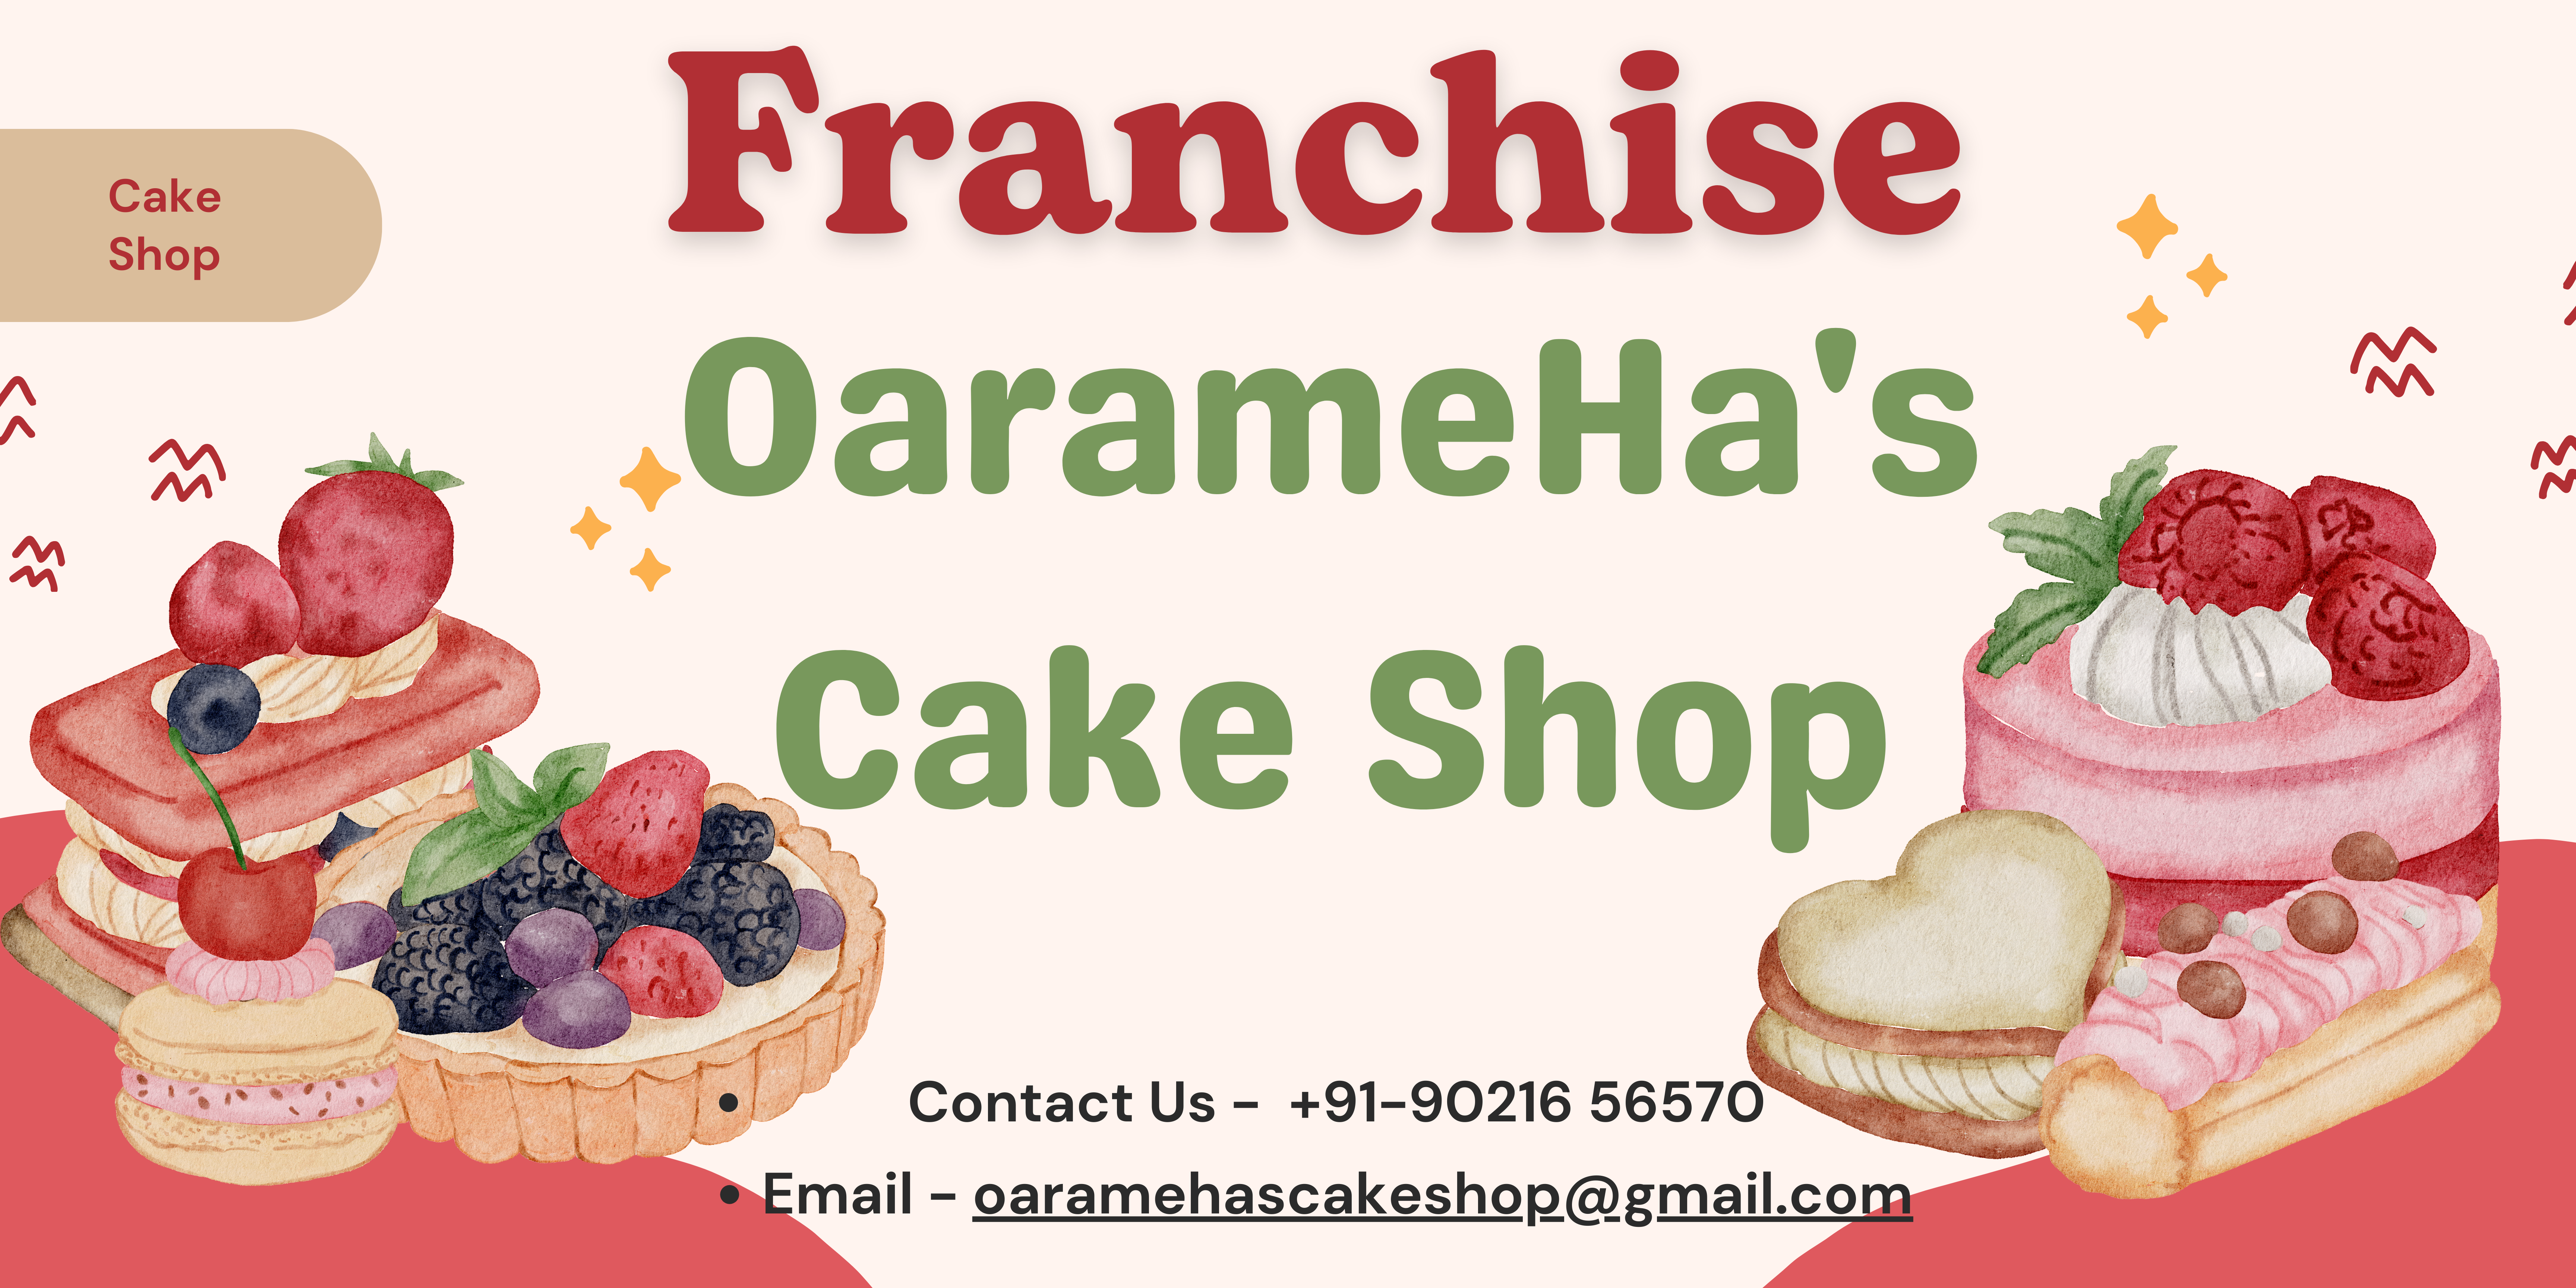 Turning An Independent Business Into A Franchise Business Is A Piece Of Cake